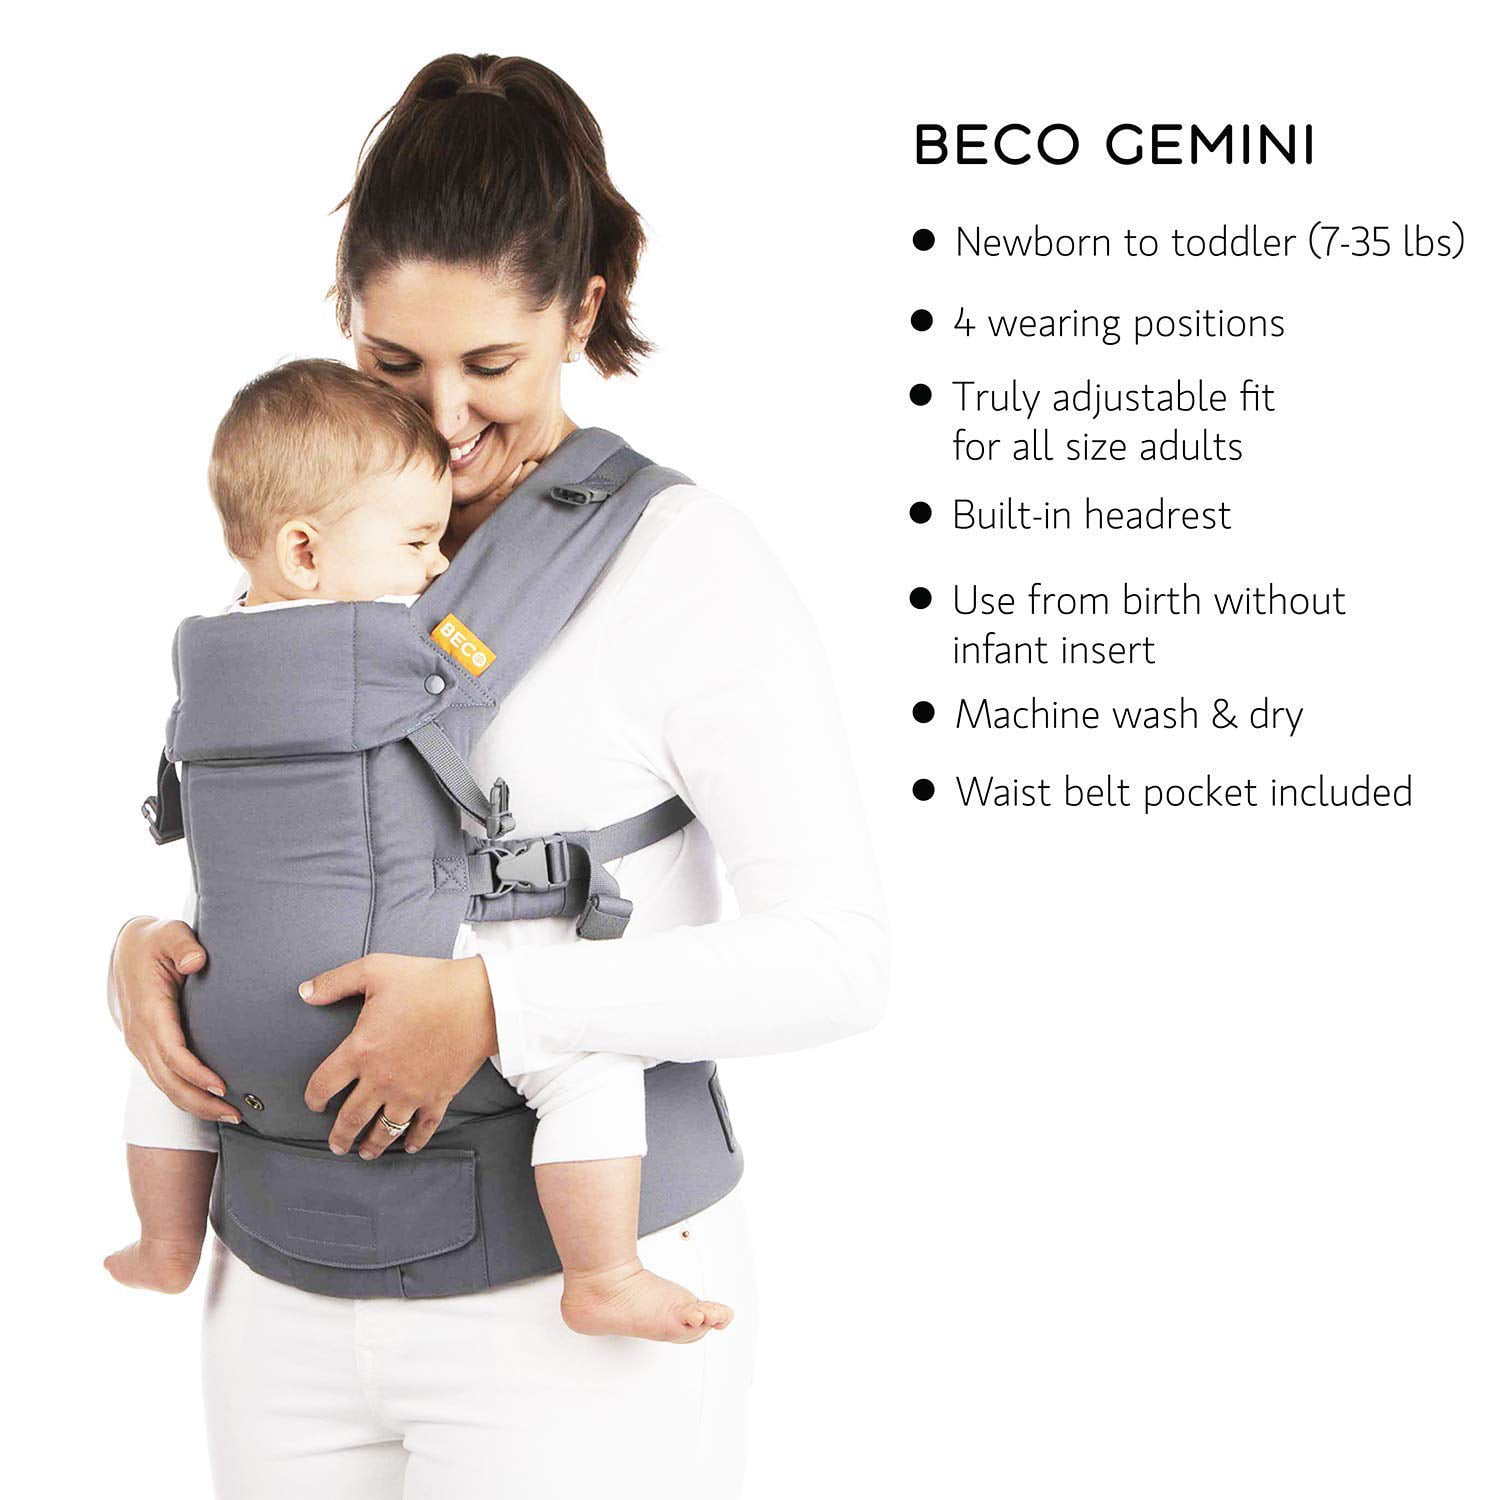 Sleek and Simple 5-in-1 All Position Backpack Style Sling for Holding Babies Beco Gemini Baby Carrier Infants and Child from 7-35 lbs Certified Ergonomic Cool Muse 